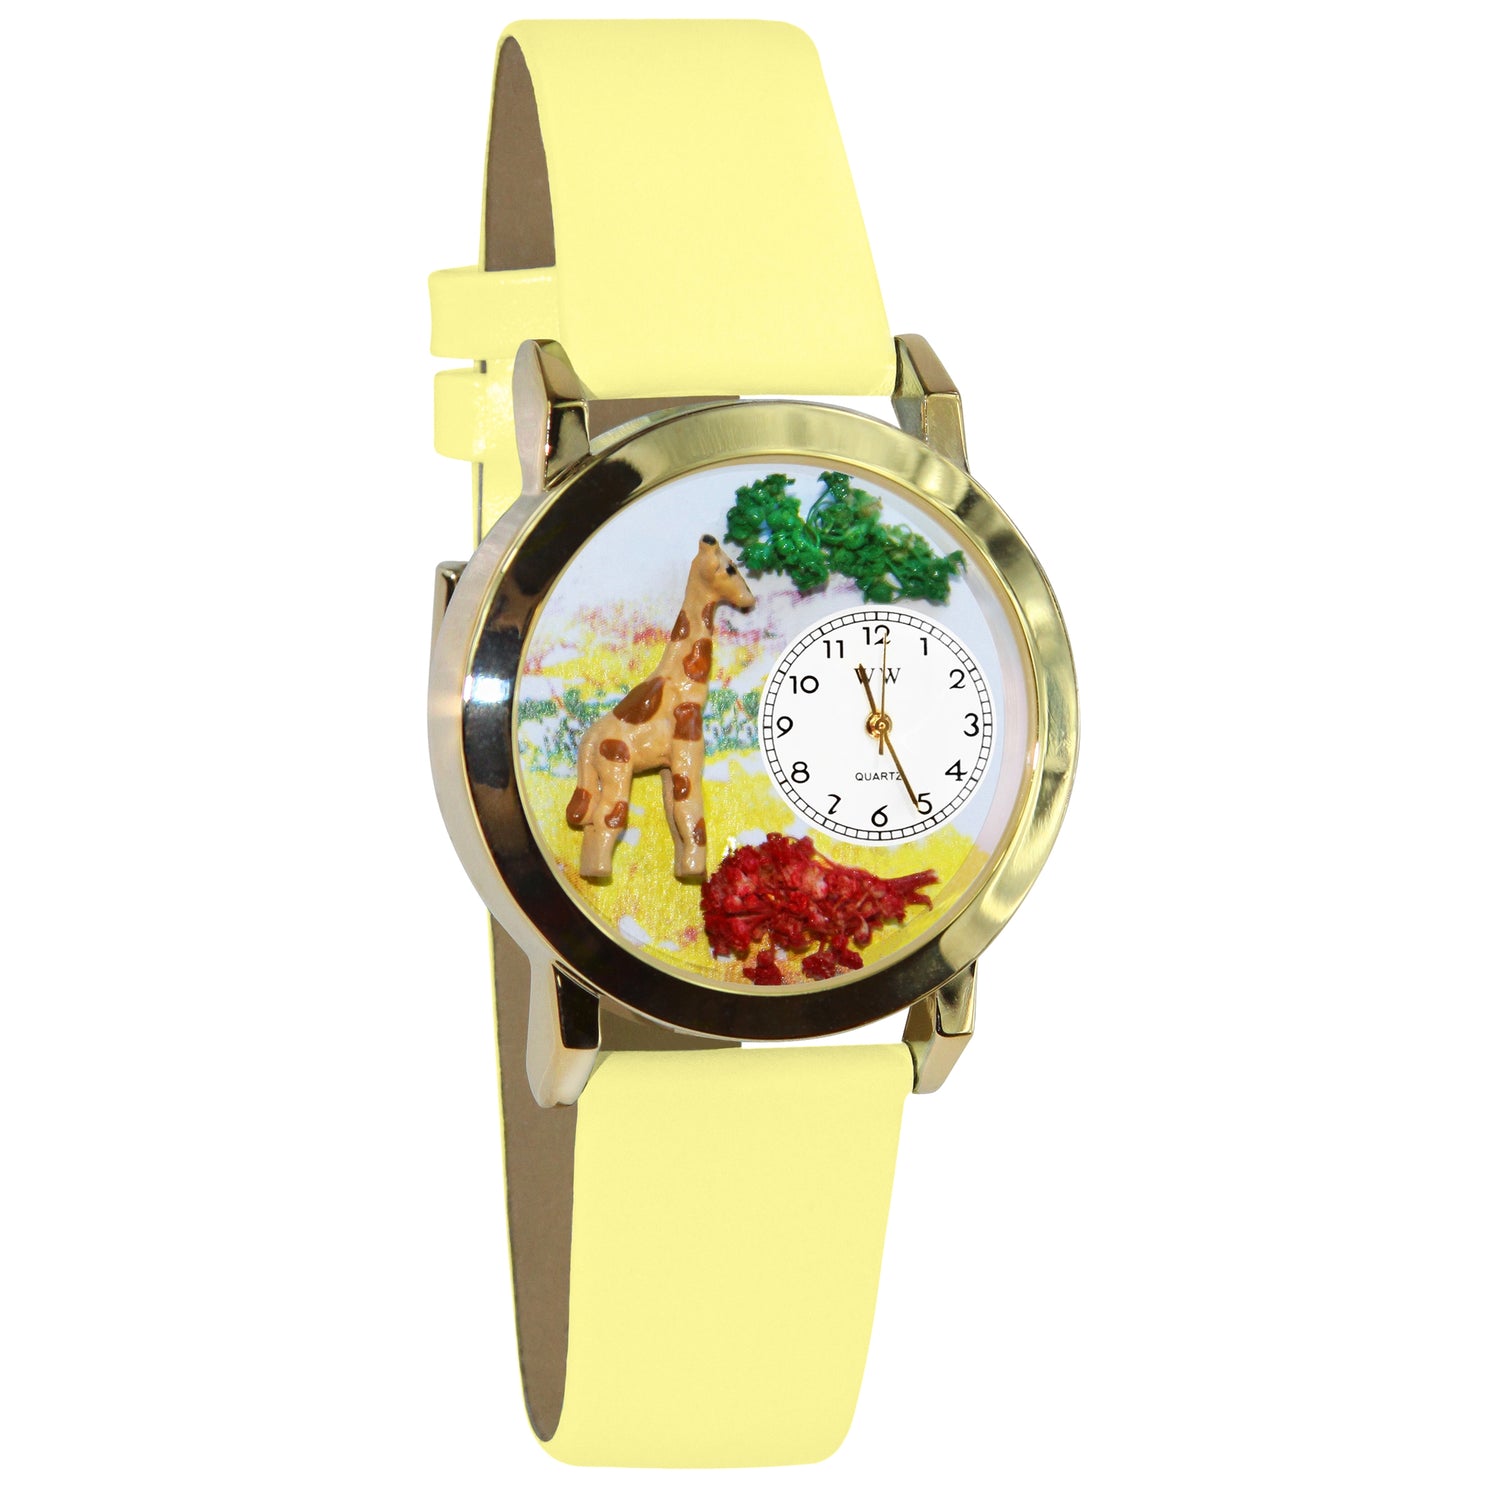 Whimsical Gifts | Giraffe 3D Watch Small Style | Handmade in USA | Animal Lover | Zoo & Sealife | Novelty Unique Fun Miniatures Gift | Gold Finish Yellow Leather Watch Band